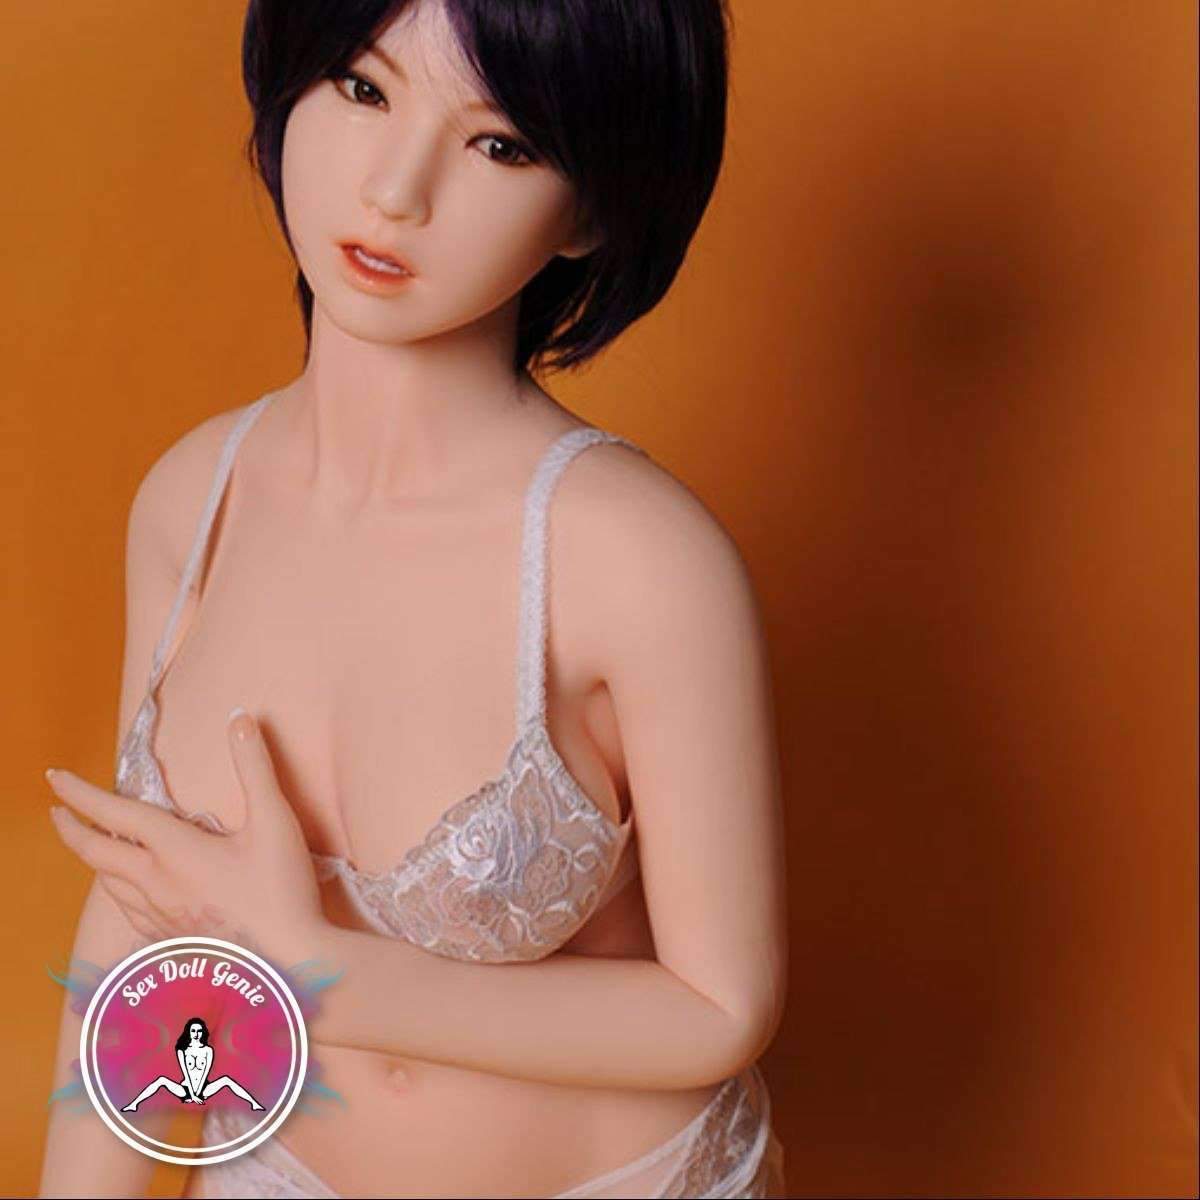 DS Doll - 158Plus - Thera Head - Type 1 D Cup Silicone Doll-20